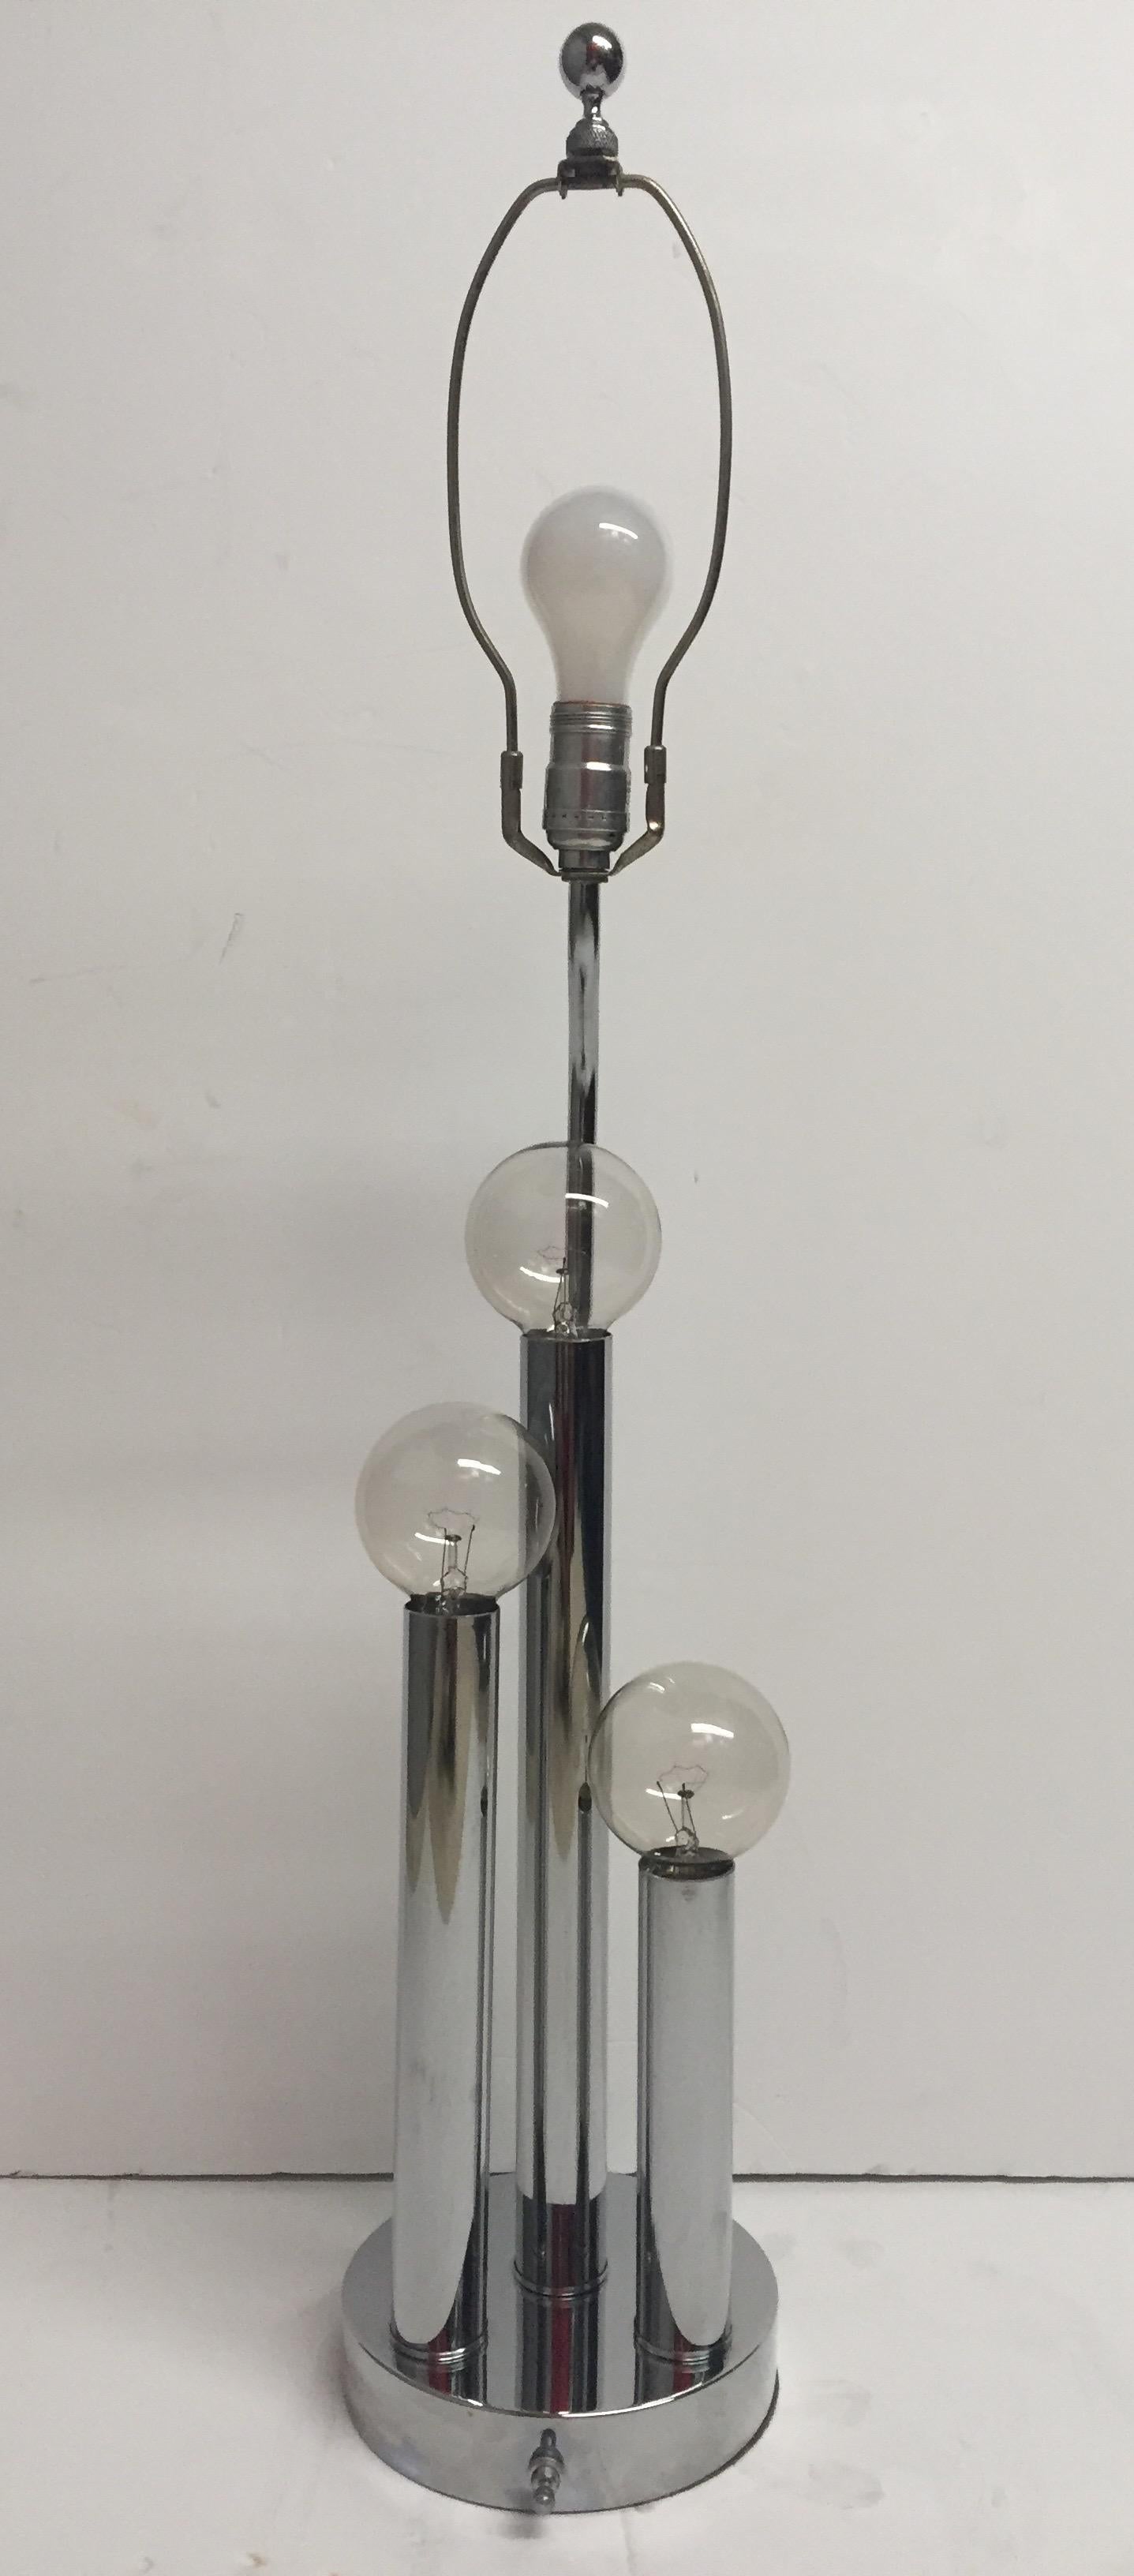 Retro chrome Mid-Century Modern table lamp having three columns in differing heights topped with cool round lightbulbs. Elongated black lacquer shade included.
Measures: Chrome base is 7.5 round 1.5 deep
25.5 inches high to socket.

40 watts per